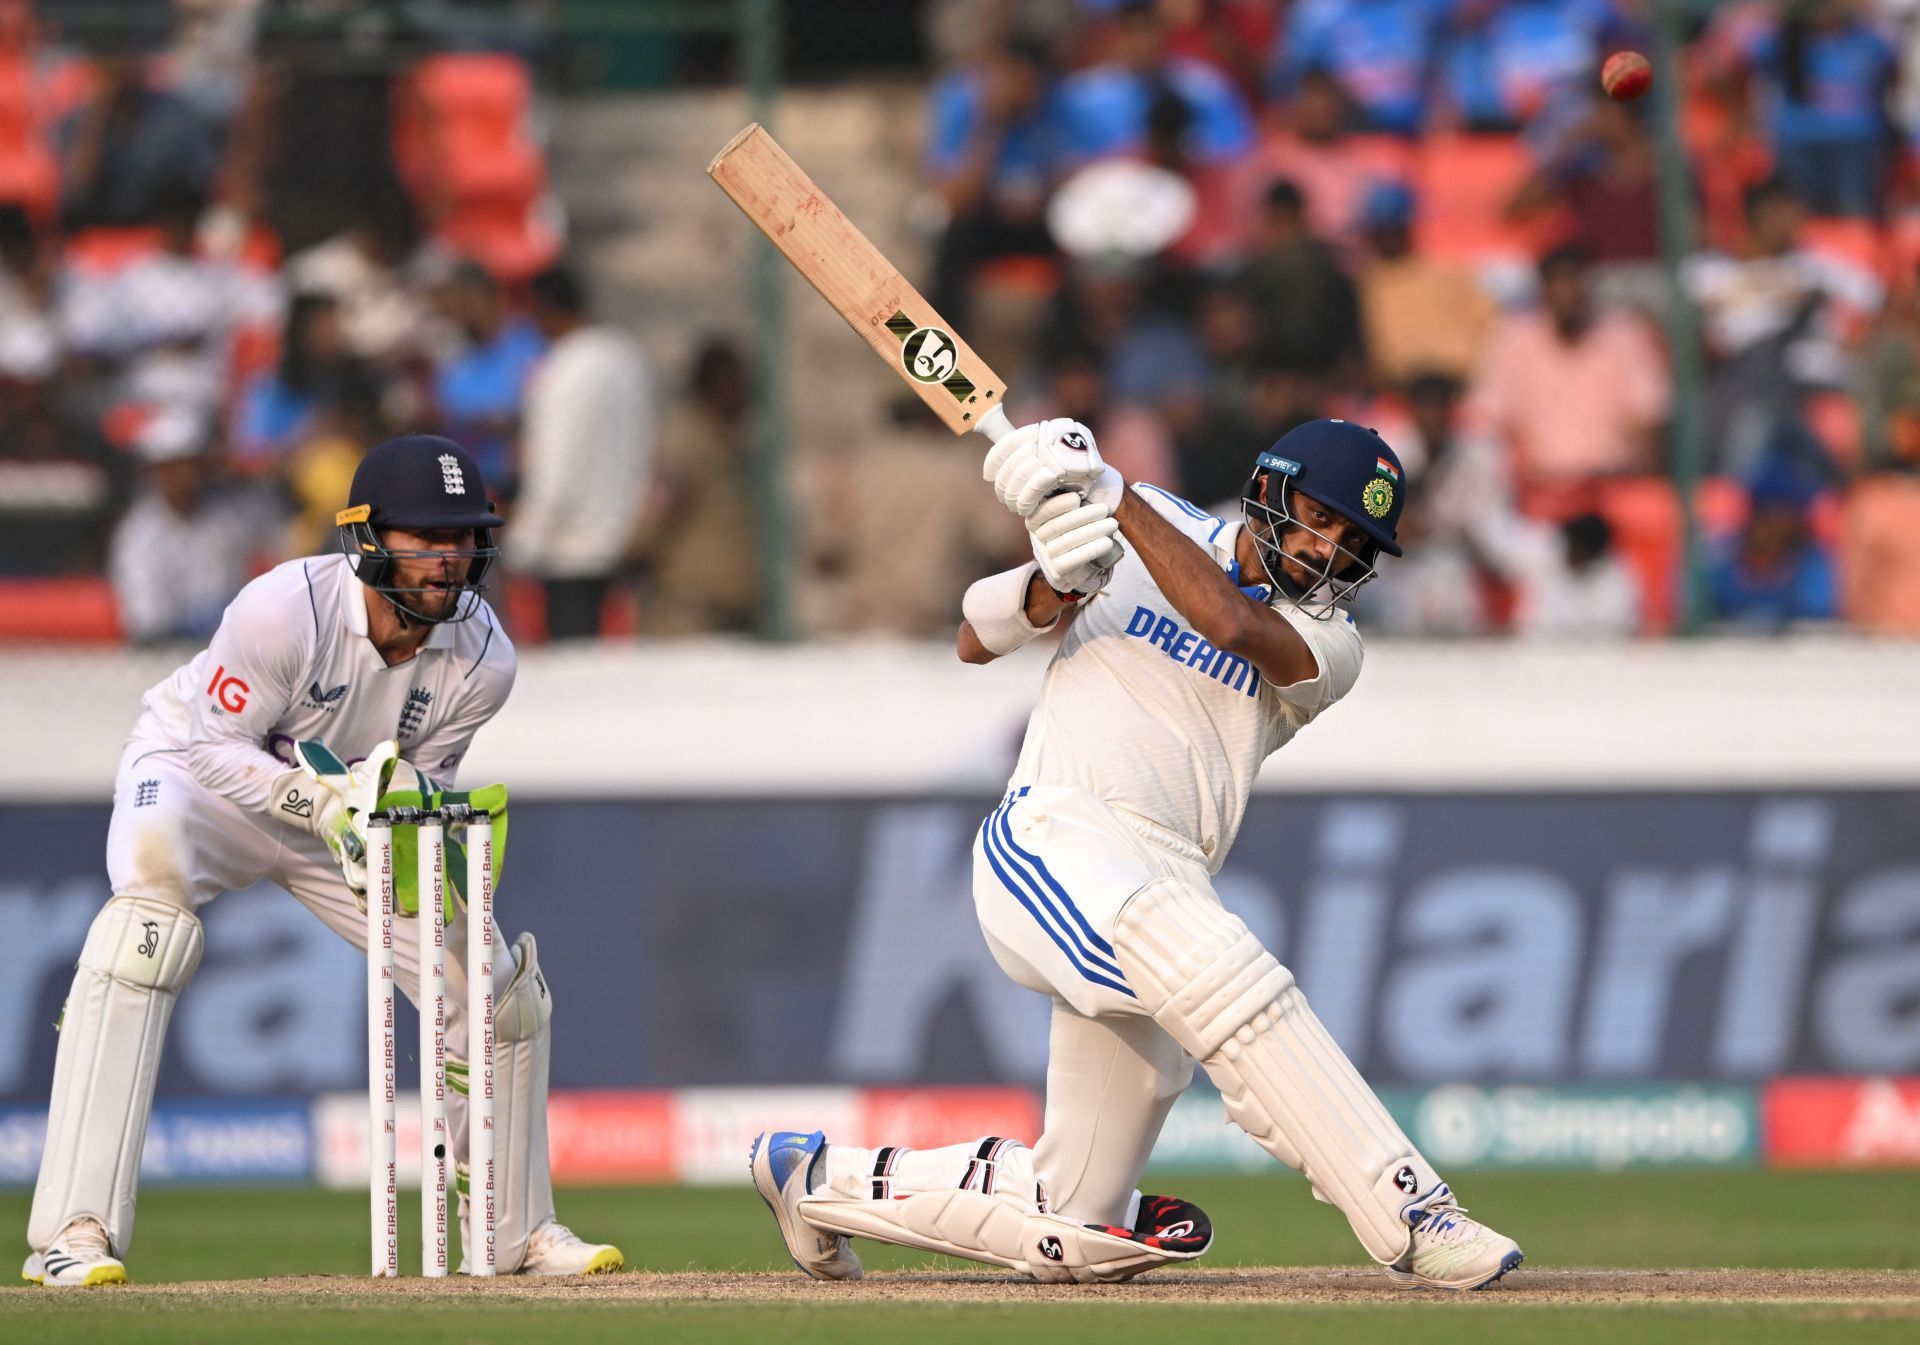 Axar Patel looks to clear the boundary